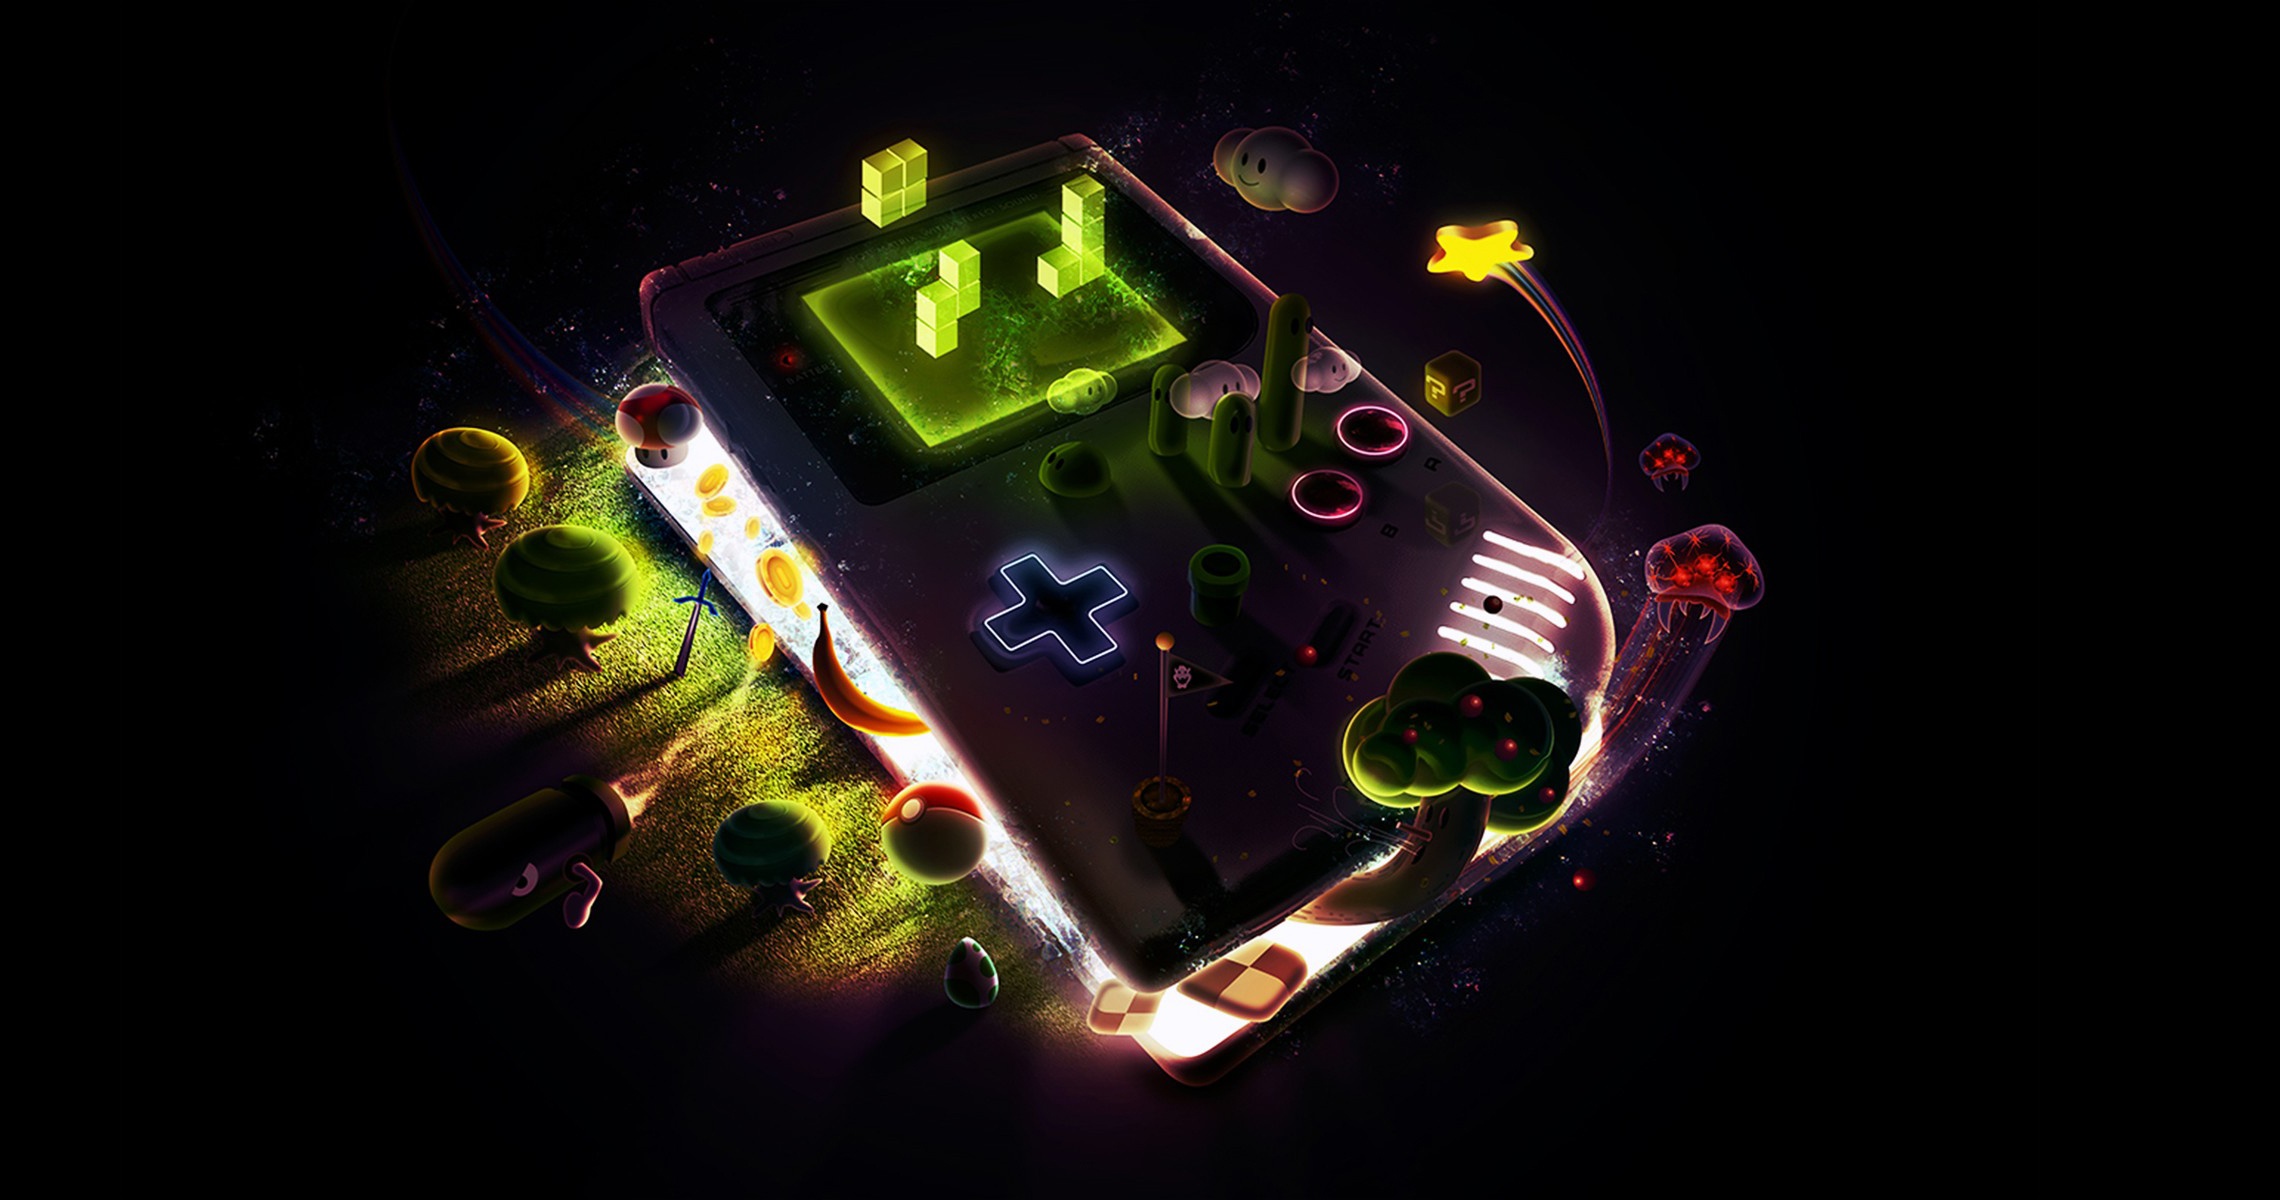 Game Boy HD Wallpaper by Aaron Campbell